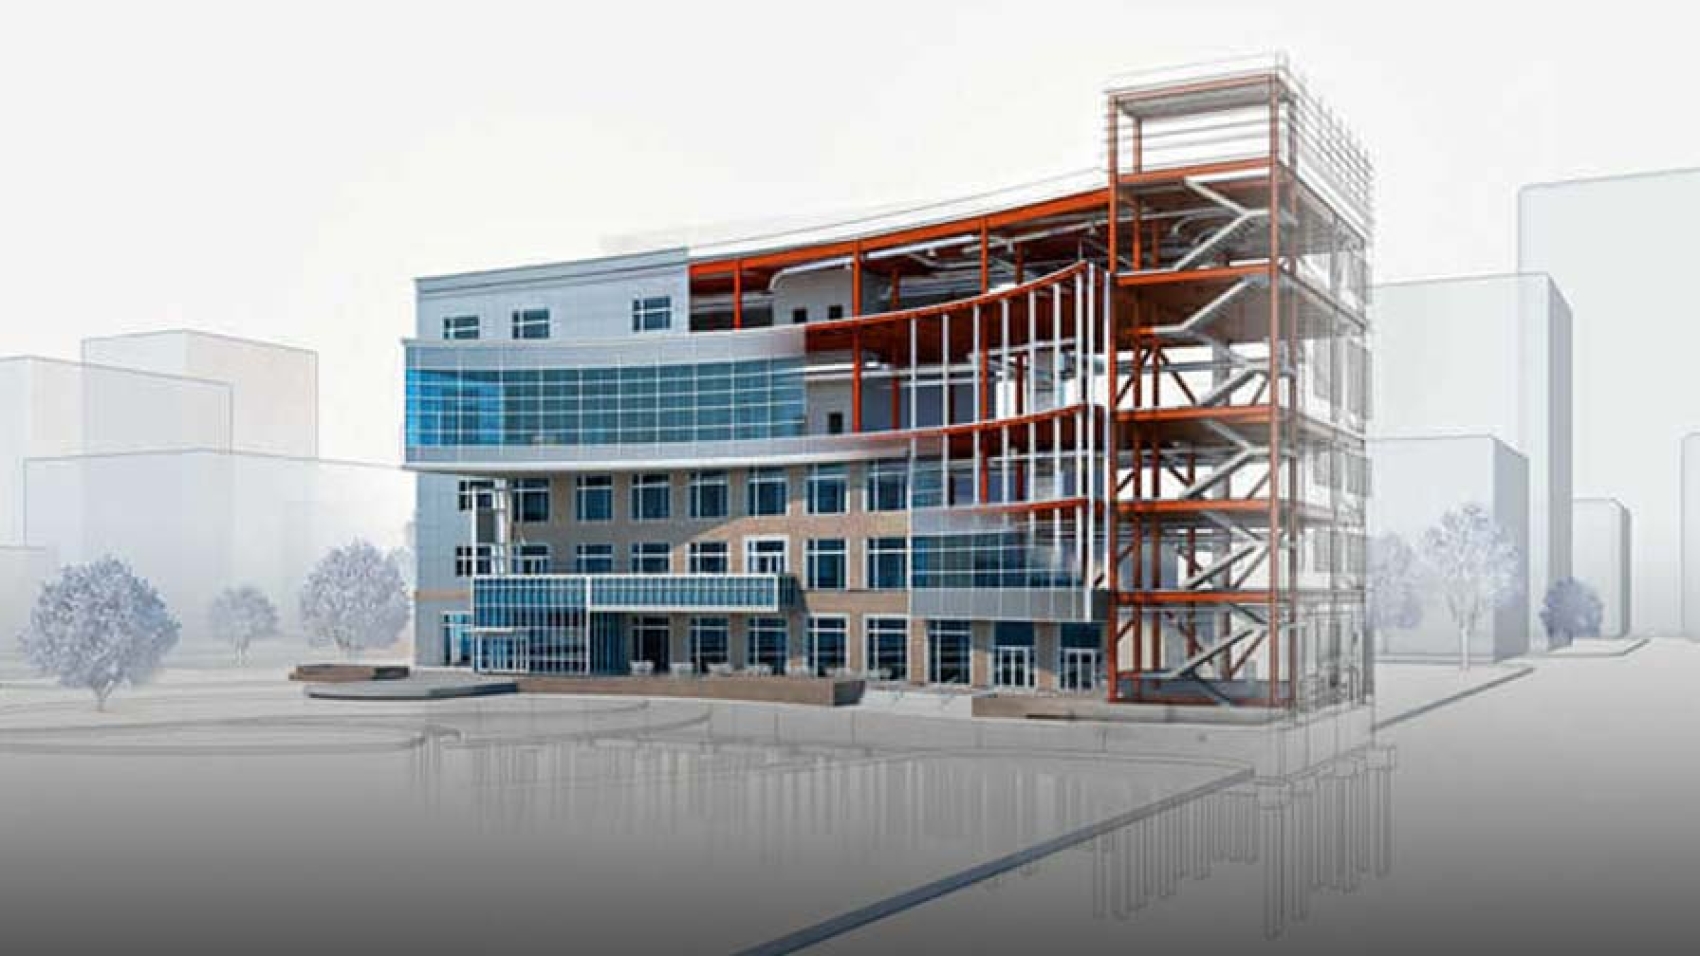 SketchUp The Uses and Benefits of BIM